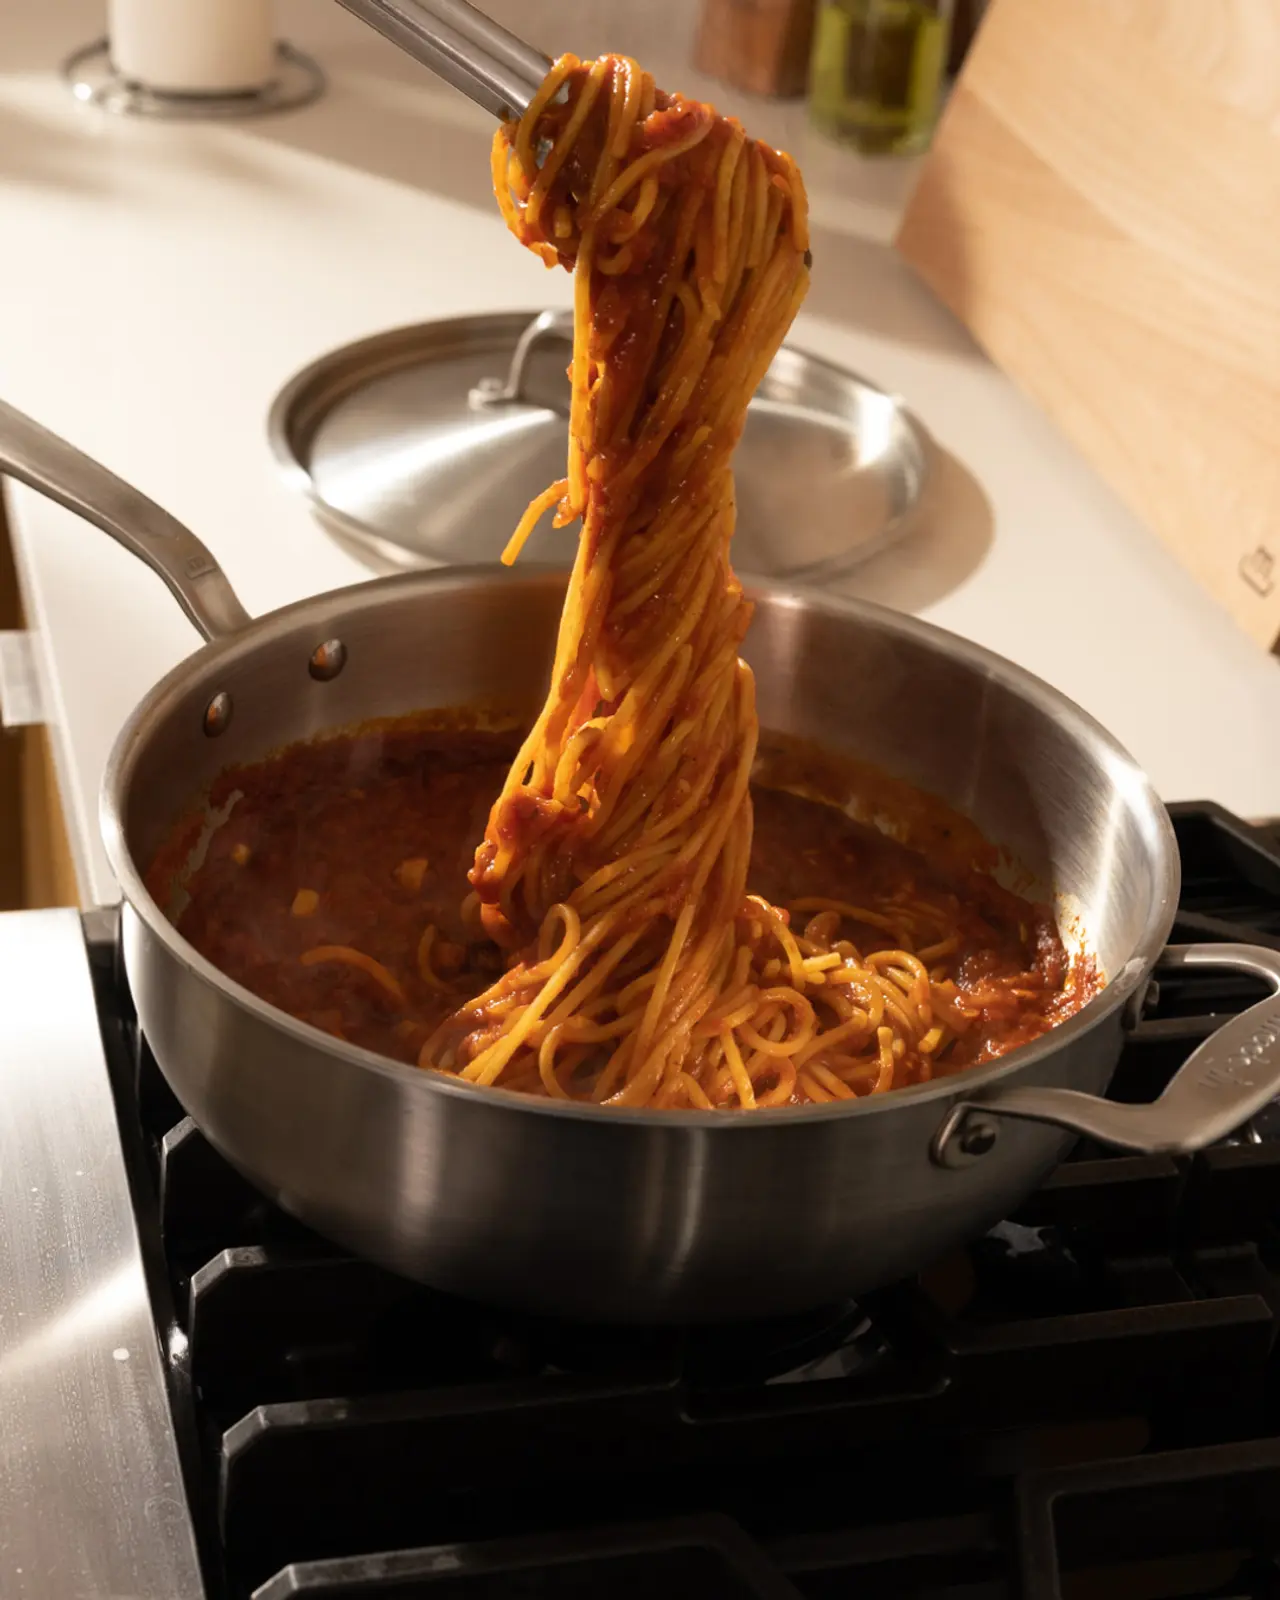 A pot on a stove containing spaghetti in tomato sauce with a large portion being lifted by tongs, showcasing the meal's thickness and richness.